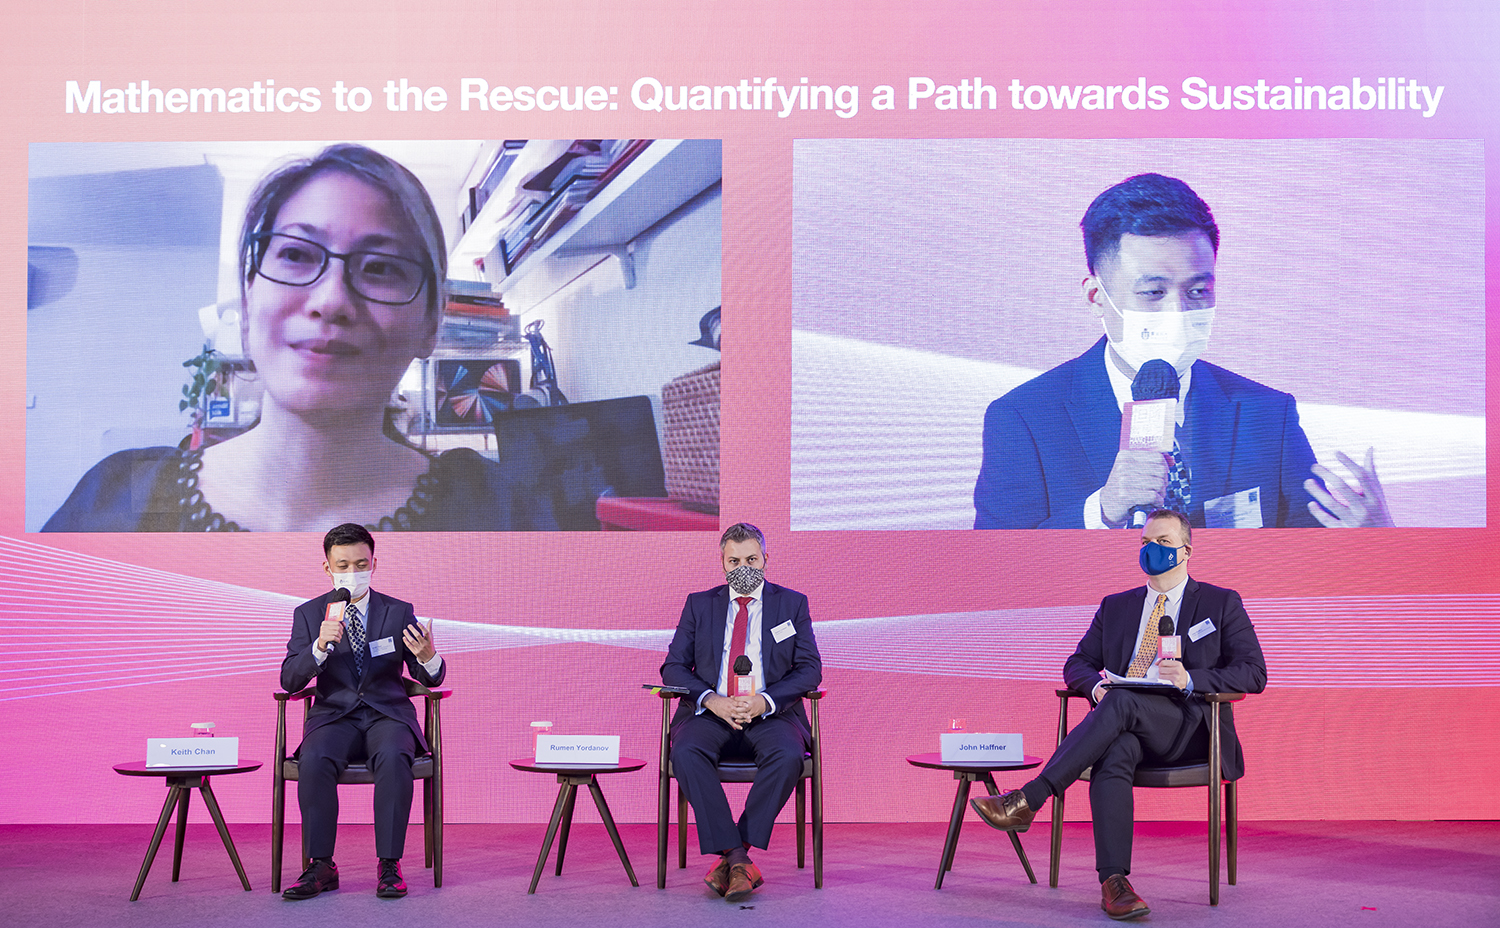 Sustainability experts Ms. Bernise Ang (upper left), Dr. Keith Chan (left), Mr. Rumen Yordanov (middle), and Mr. John Haffner (lower right) sharing their views on 